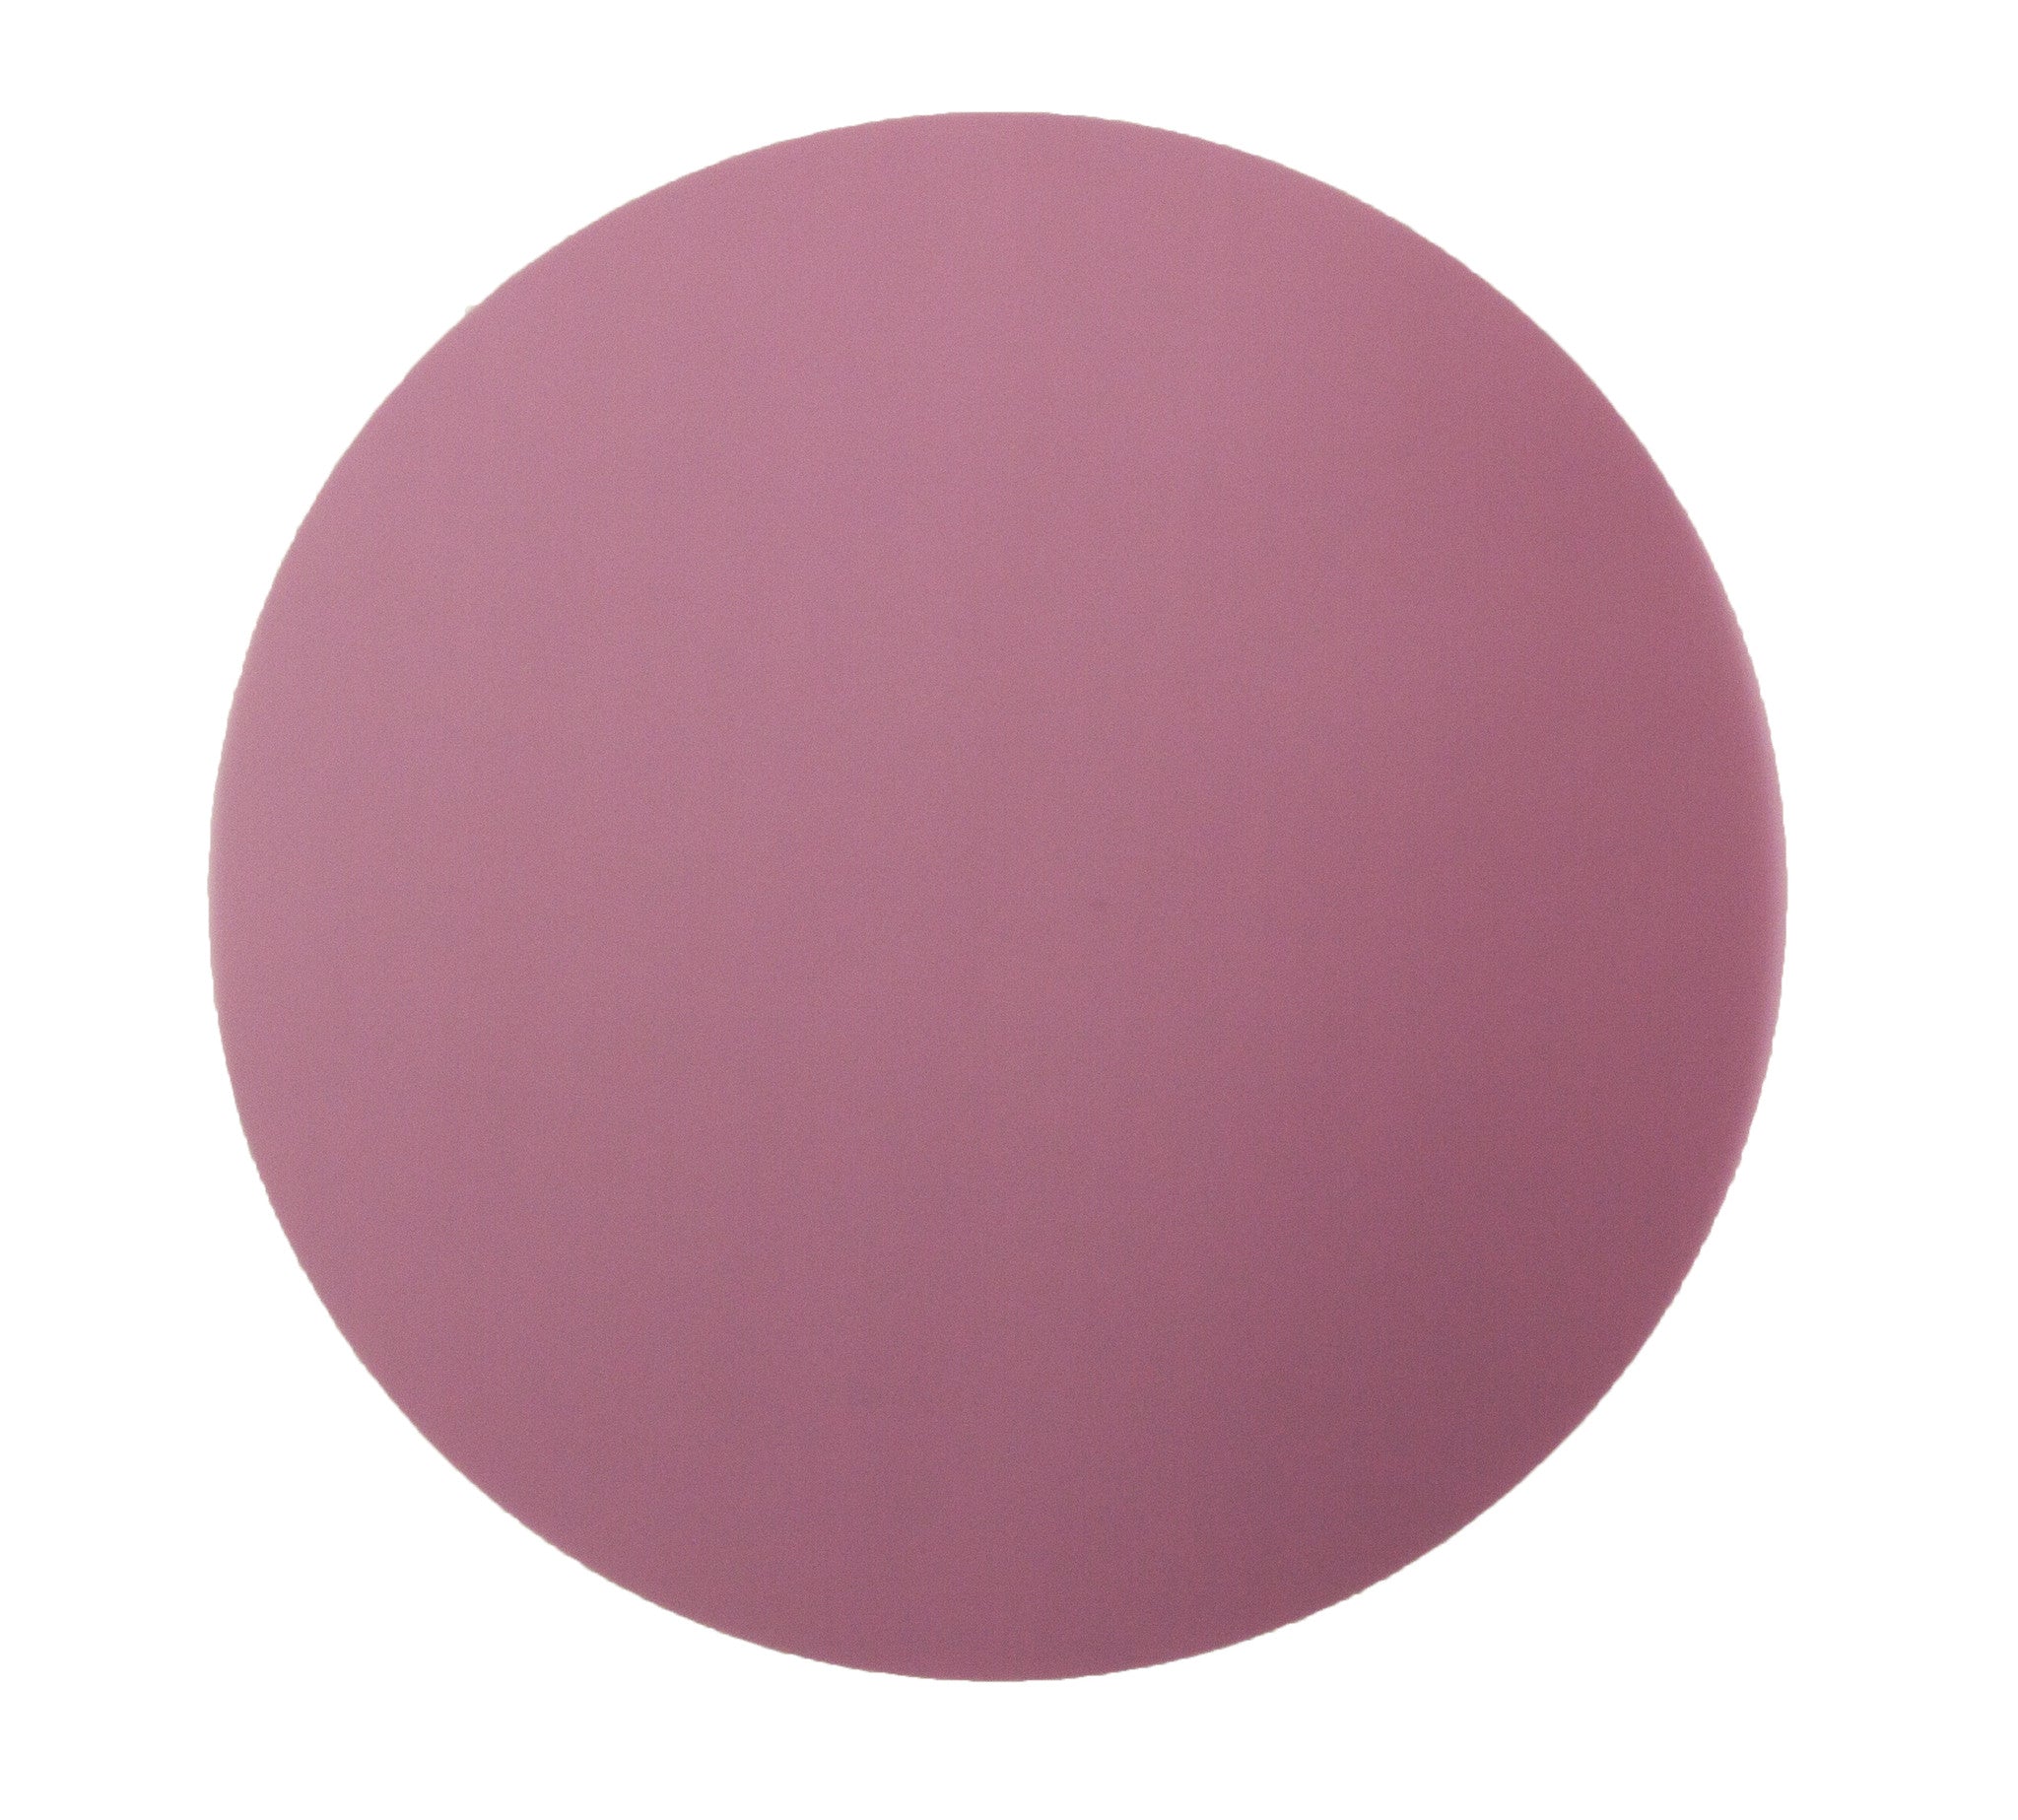 3M 662XW Type H Diamond Lapping Film - 3µm Grit - Pink Color - 4